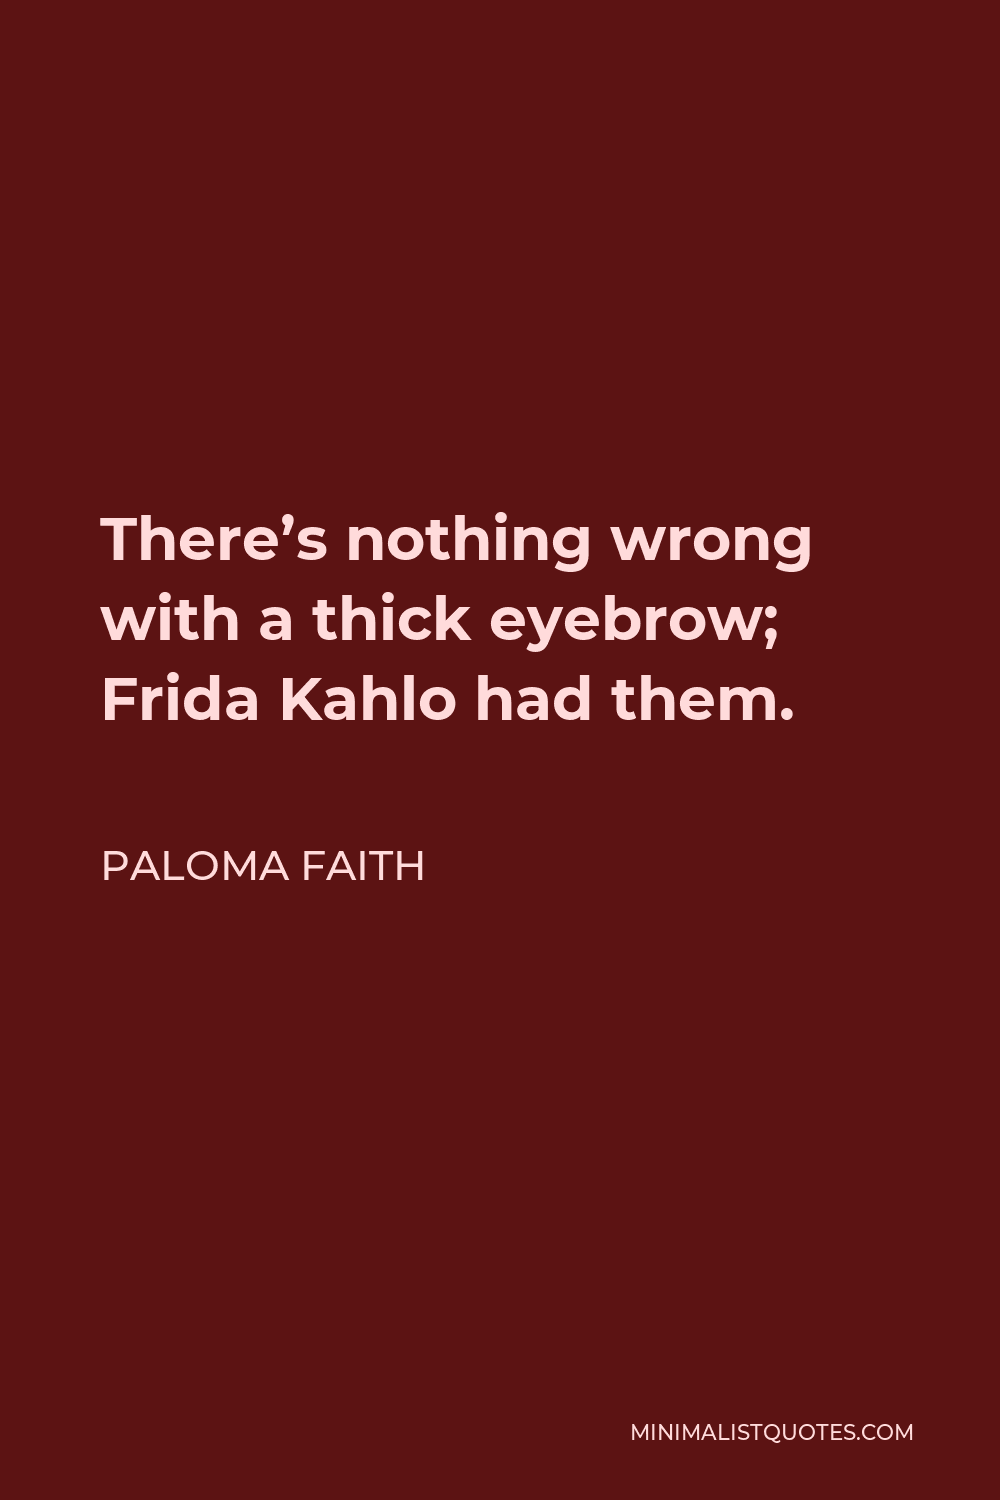 Paloma Faith Quote - There’s nothing wrong with a thick eyebrow; Frida Kahlo had them.